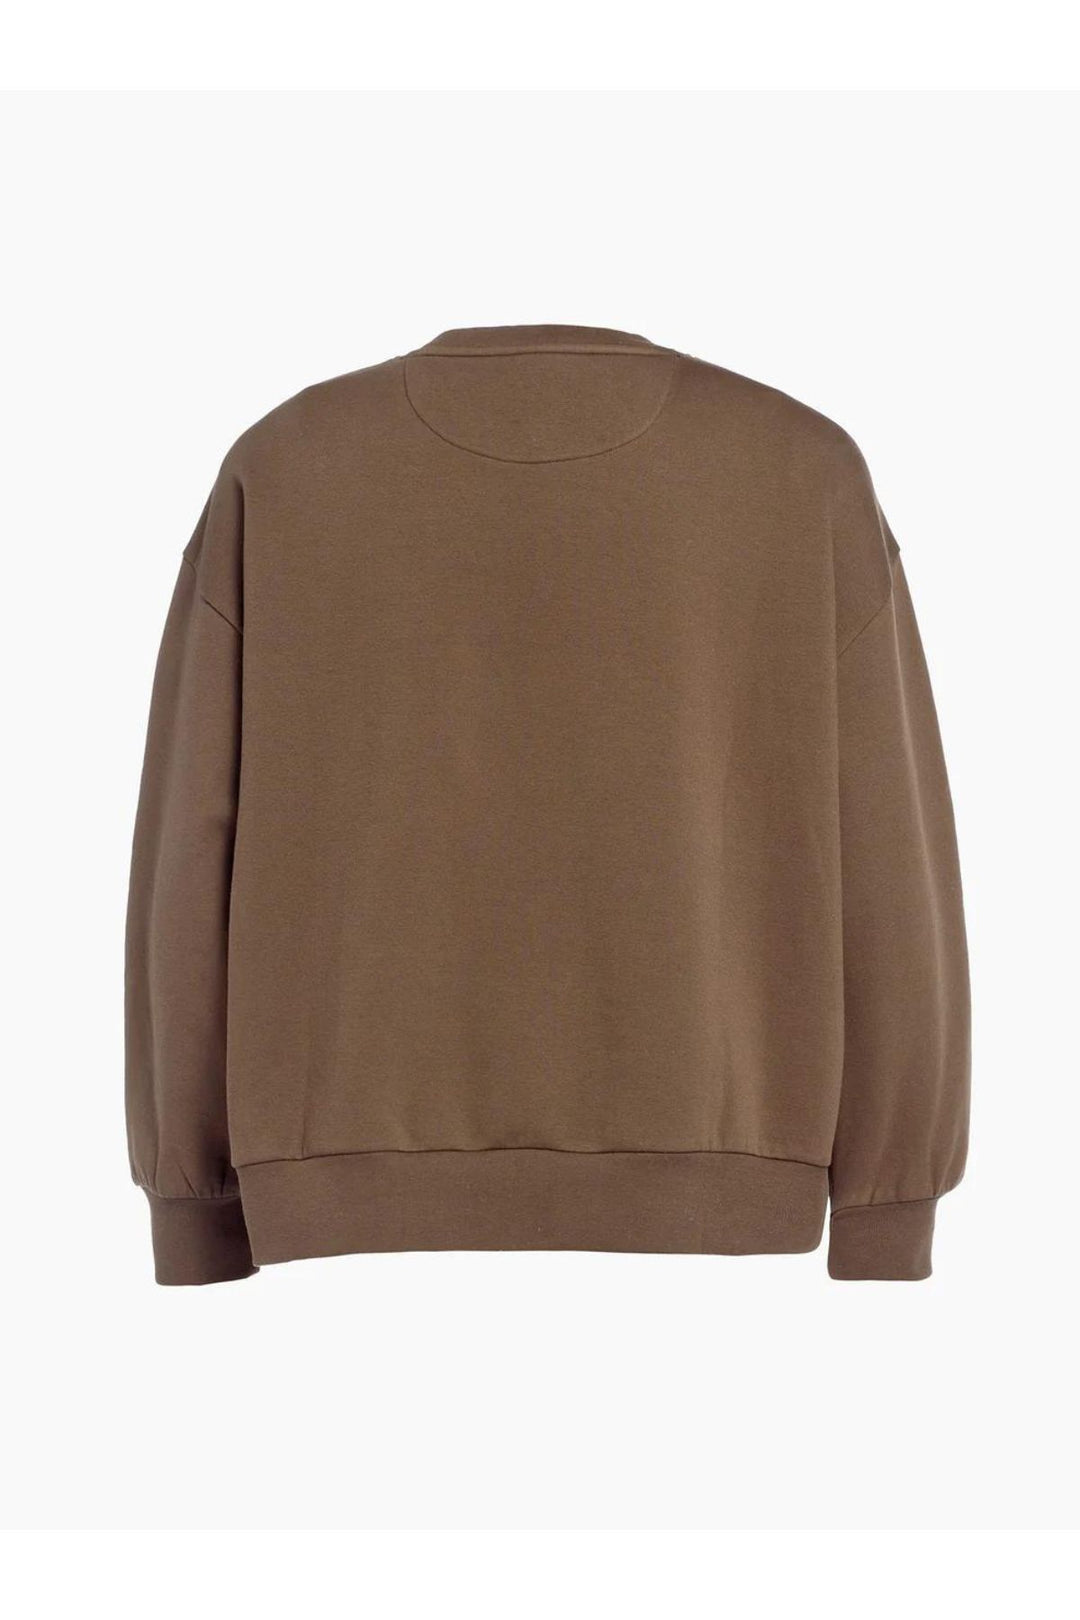 RINK crew neck sweater (Army green)